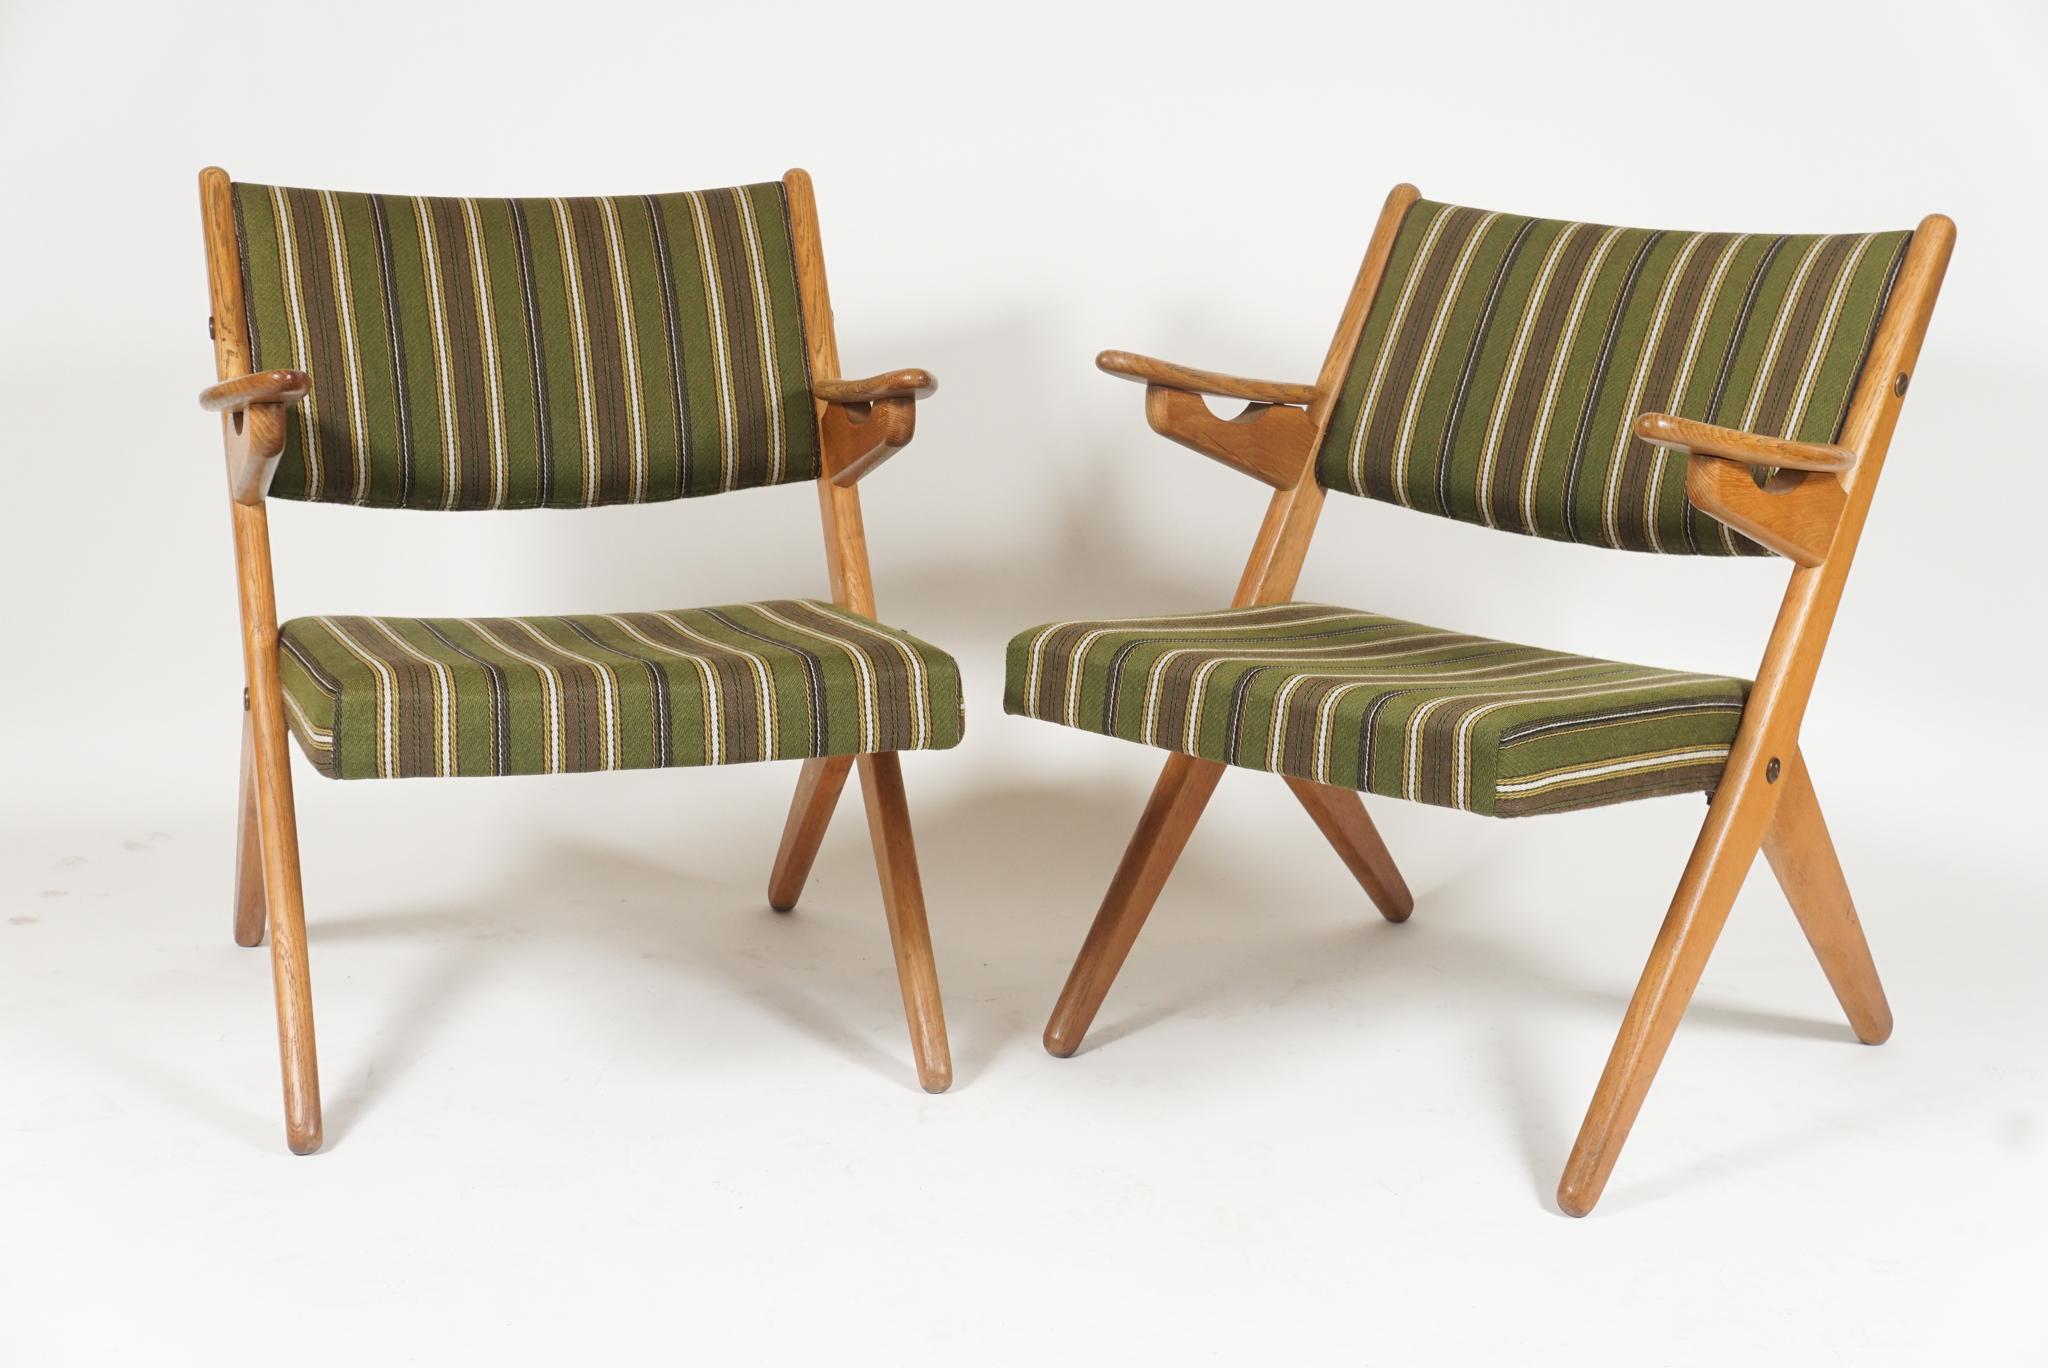 Sleek pair of Scandinavian easy lounge chairs reminiscent of Folke Ohlsson scissor chairs and Hans Wegner sawbuck chairs. Oak framed with original cushions and fabric. Great midcentury lines in a sleek pair of comfortable chairs.